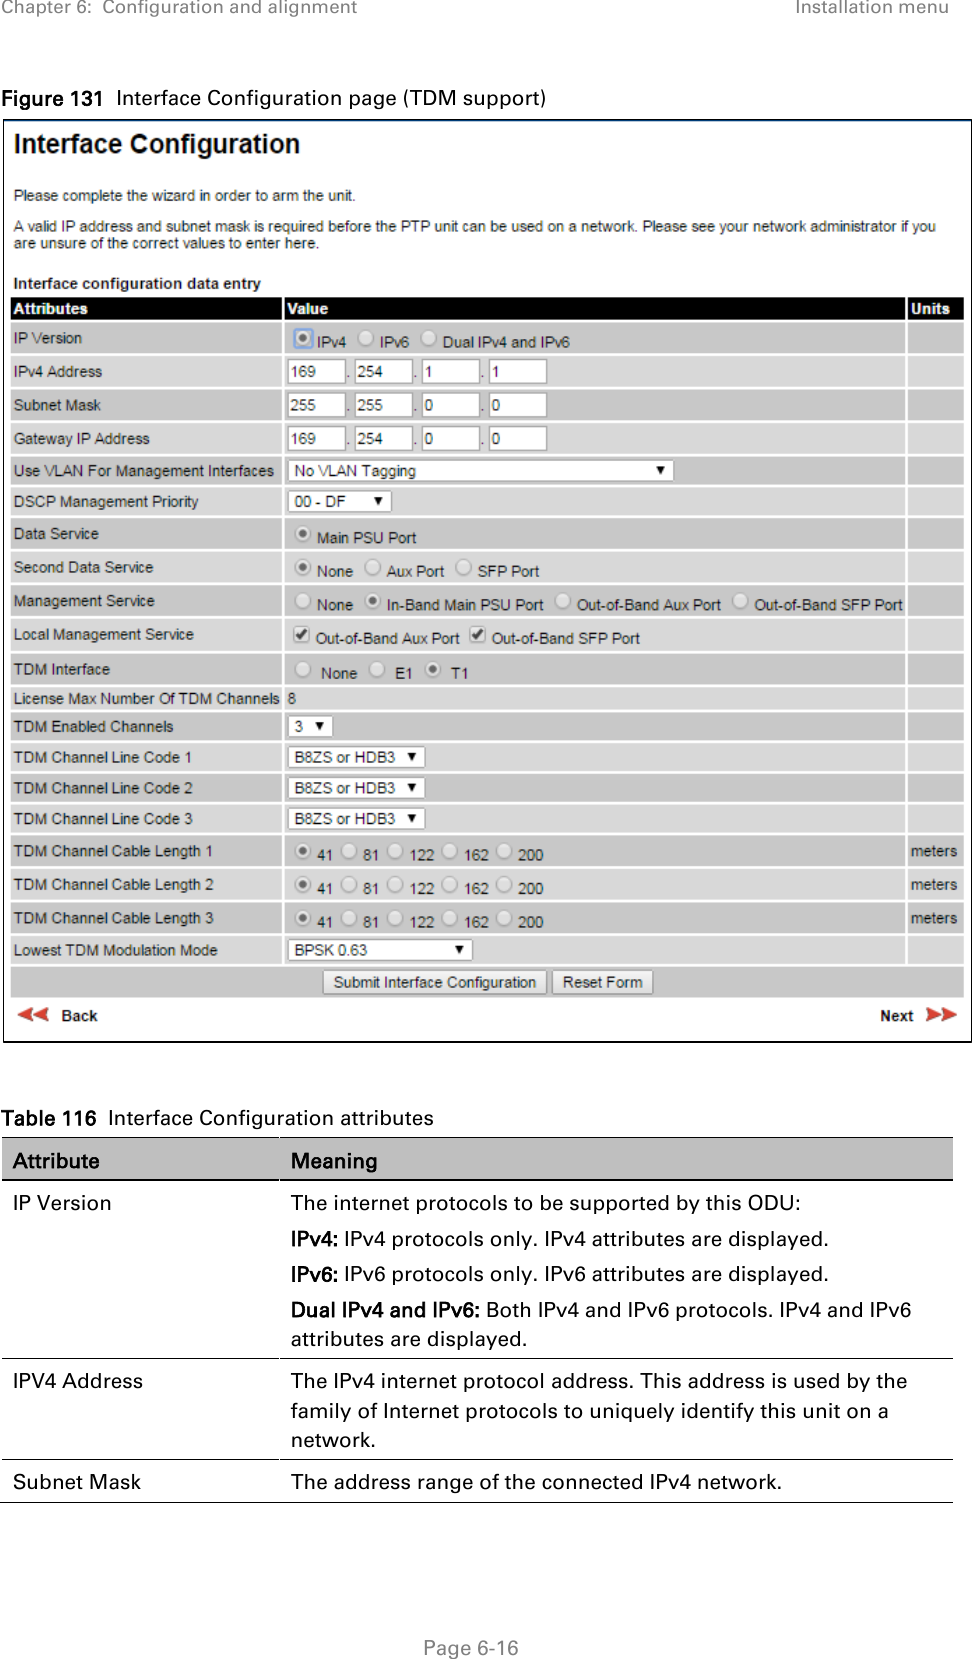 Chapter 6:  Configuration and alignment Installation menu  Figure 131  Interface Configuration page (TDM support)   Table 116  Interface Configuration attributes Attribute Meaning IP Version The internet protocols to be supported by this ODU: IPv4: IPv4 protocols only. IPv4 attributes are displayed. IPv6: IPv6 protocols only. IPv6 attributes are displayed. Dual IPv4 and IPv6: Both IPv4 and IPv6 protocols. IPv4 and IPv6 attributes are displayed. IPV4 Address The IPv4 internet protocol address. This address is used by the family of Internet protocols to uniquely identify this unit on a network. Subnet Mask The address range of the connected IPv4 network.  Page 6-16 